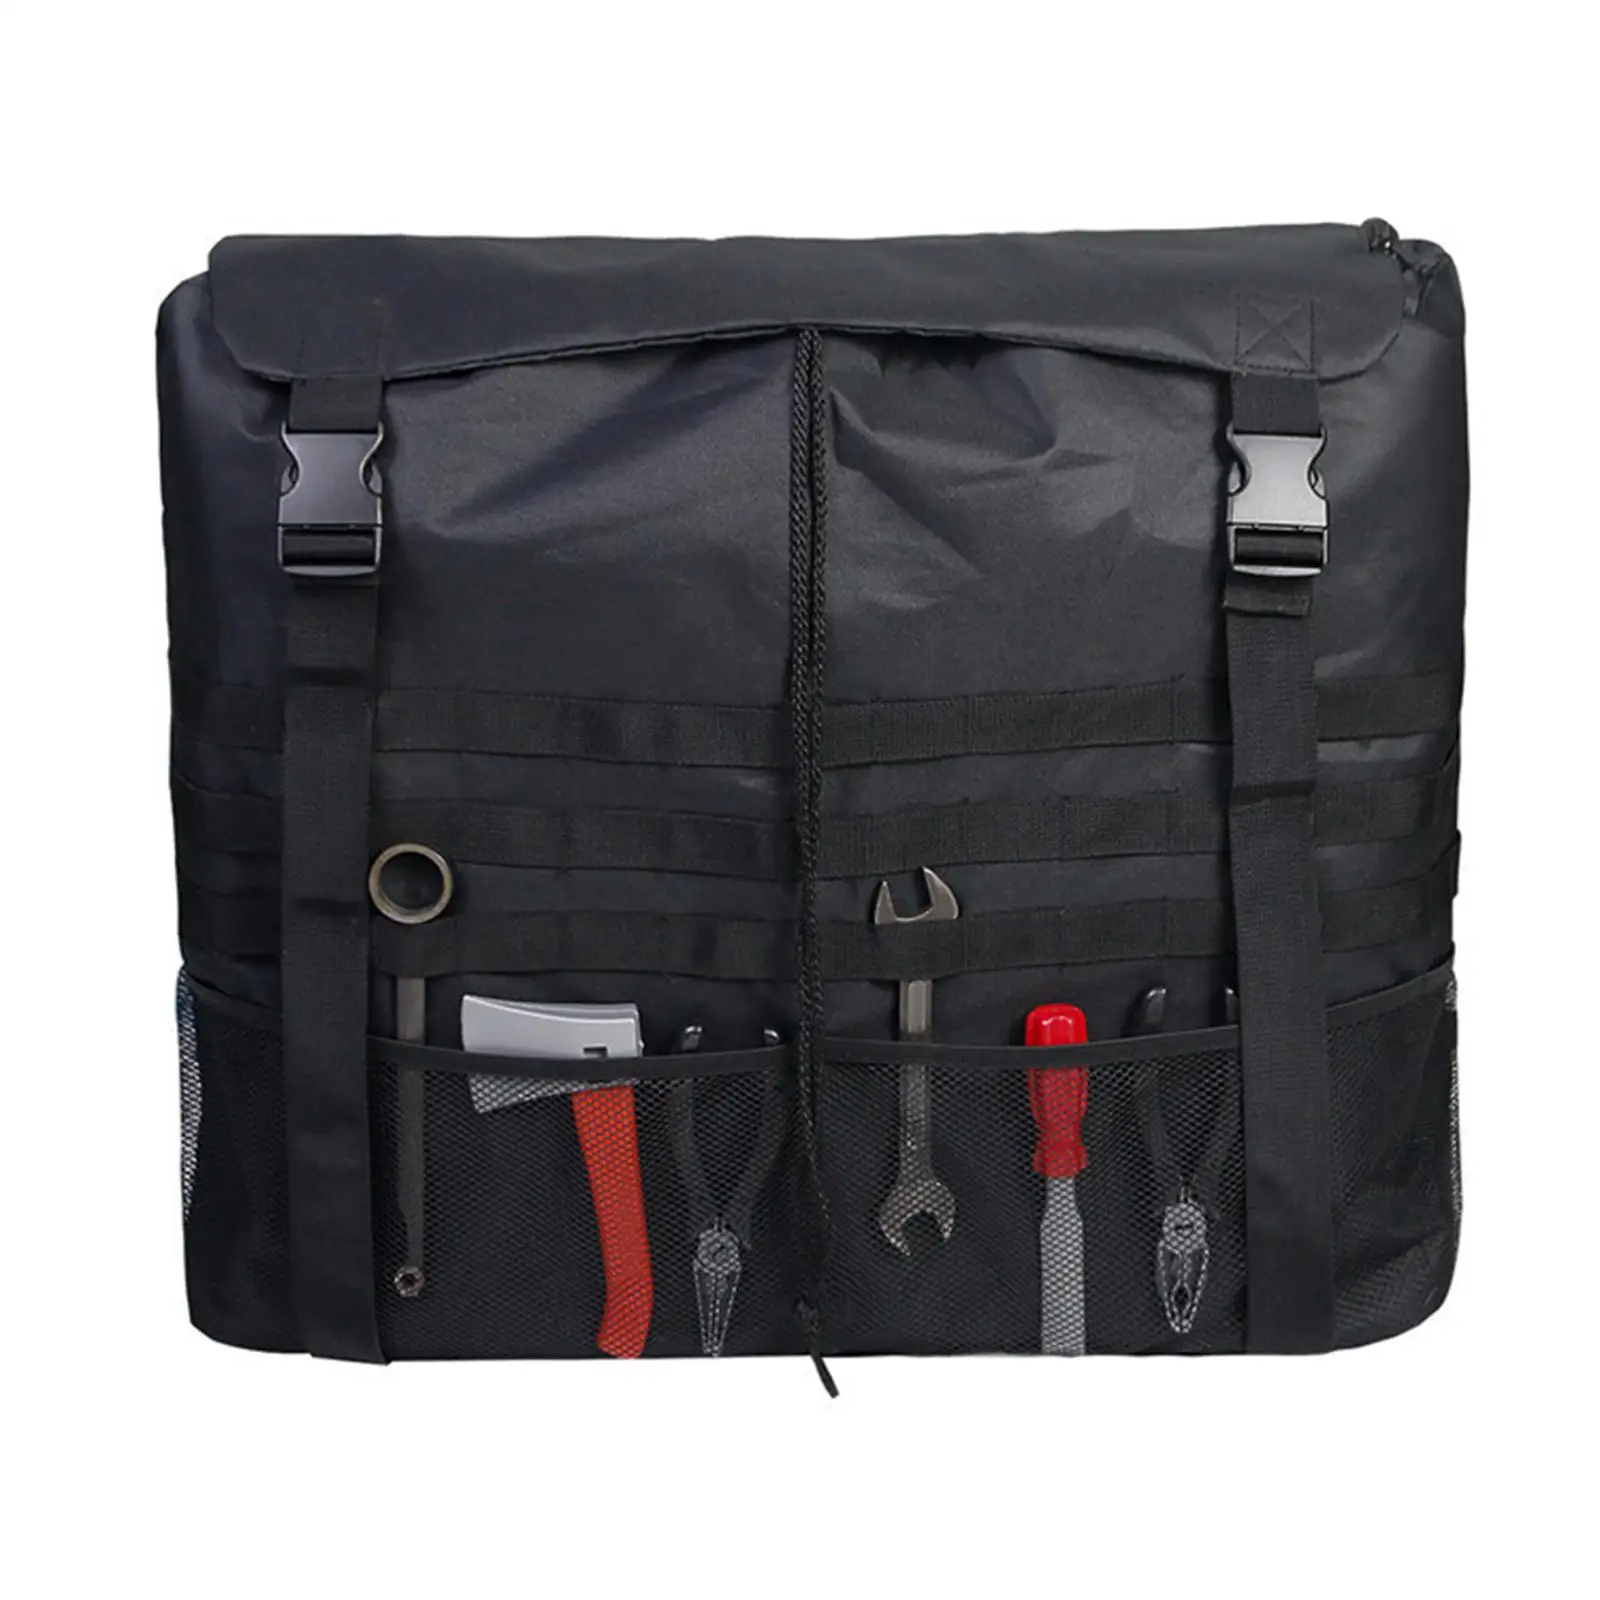 Spare Tire bag Rear Wheel Bag Adjustable Spare Tire Spare Tire Tool bag for Trailers Campers